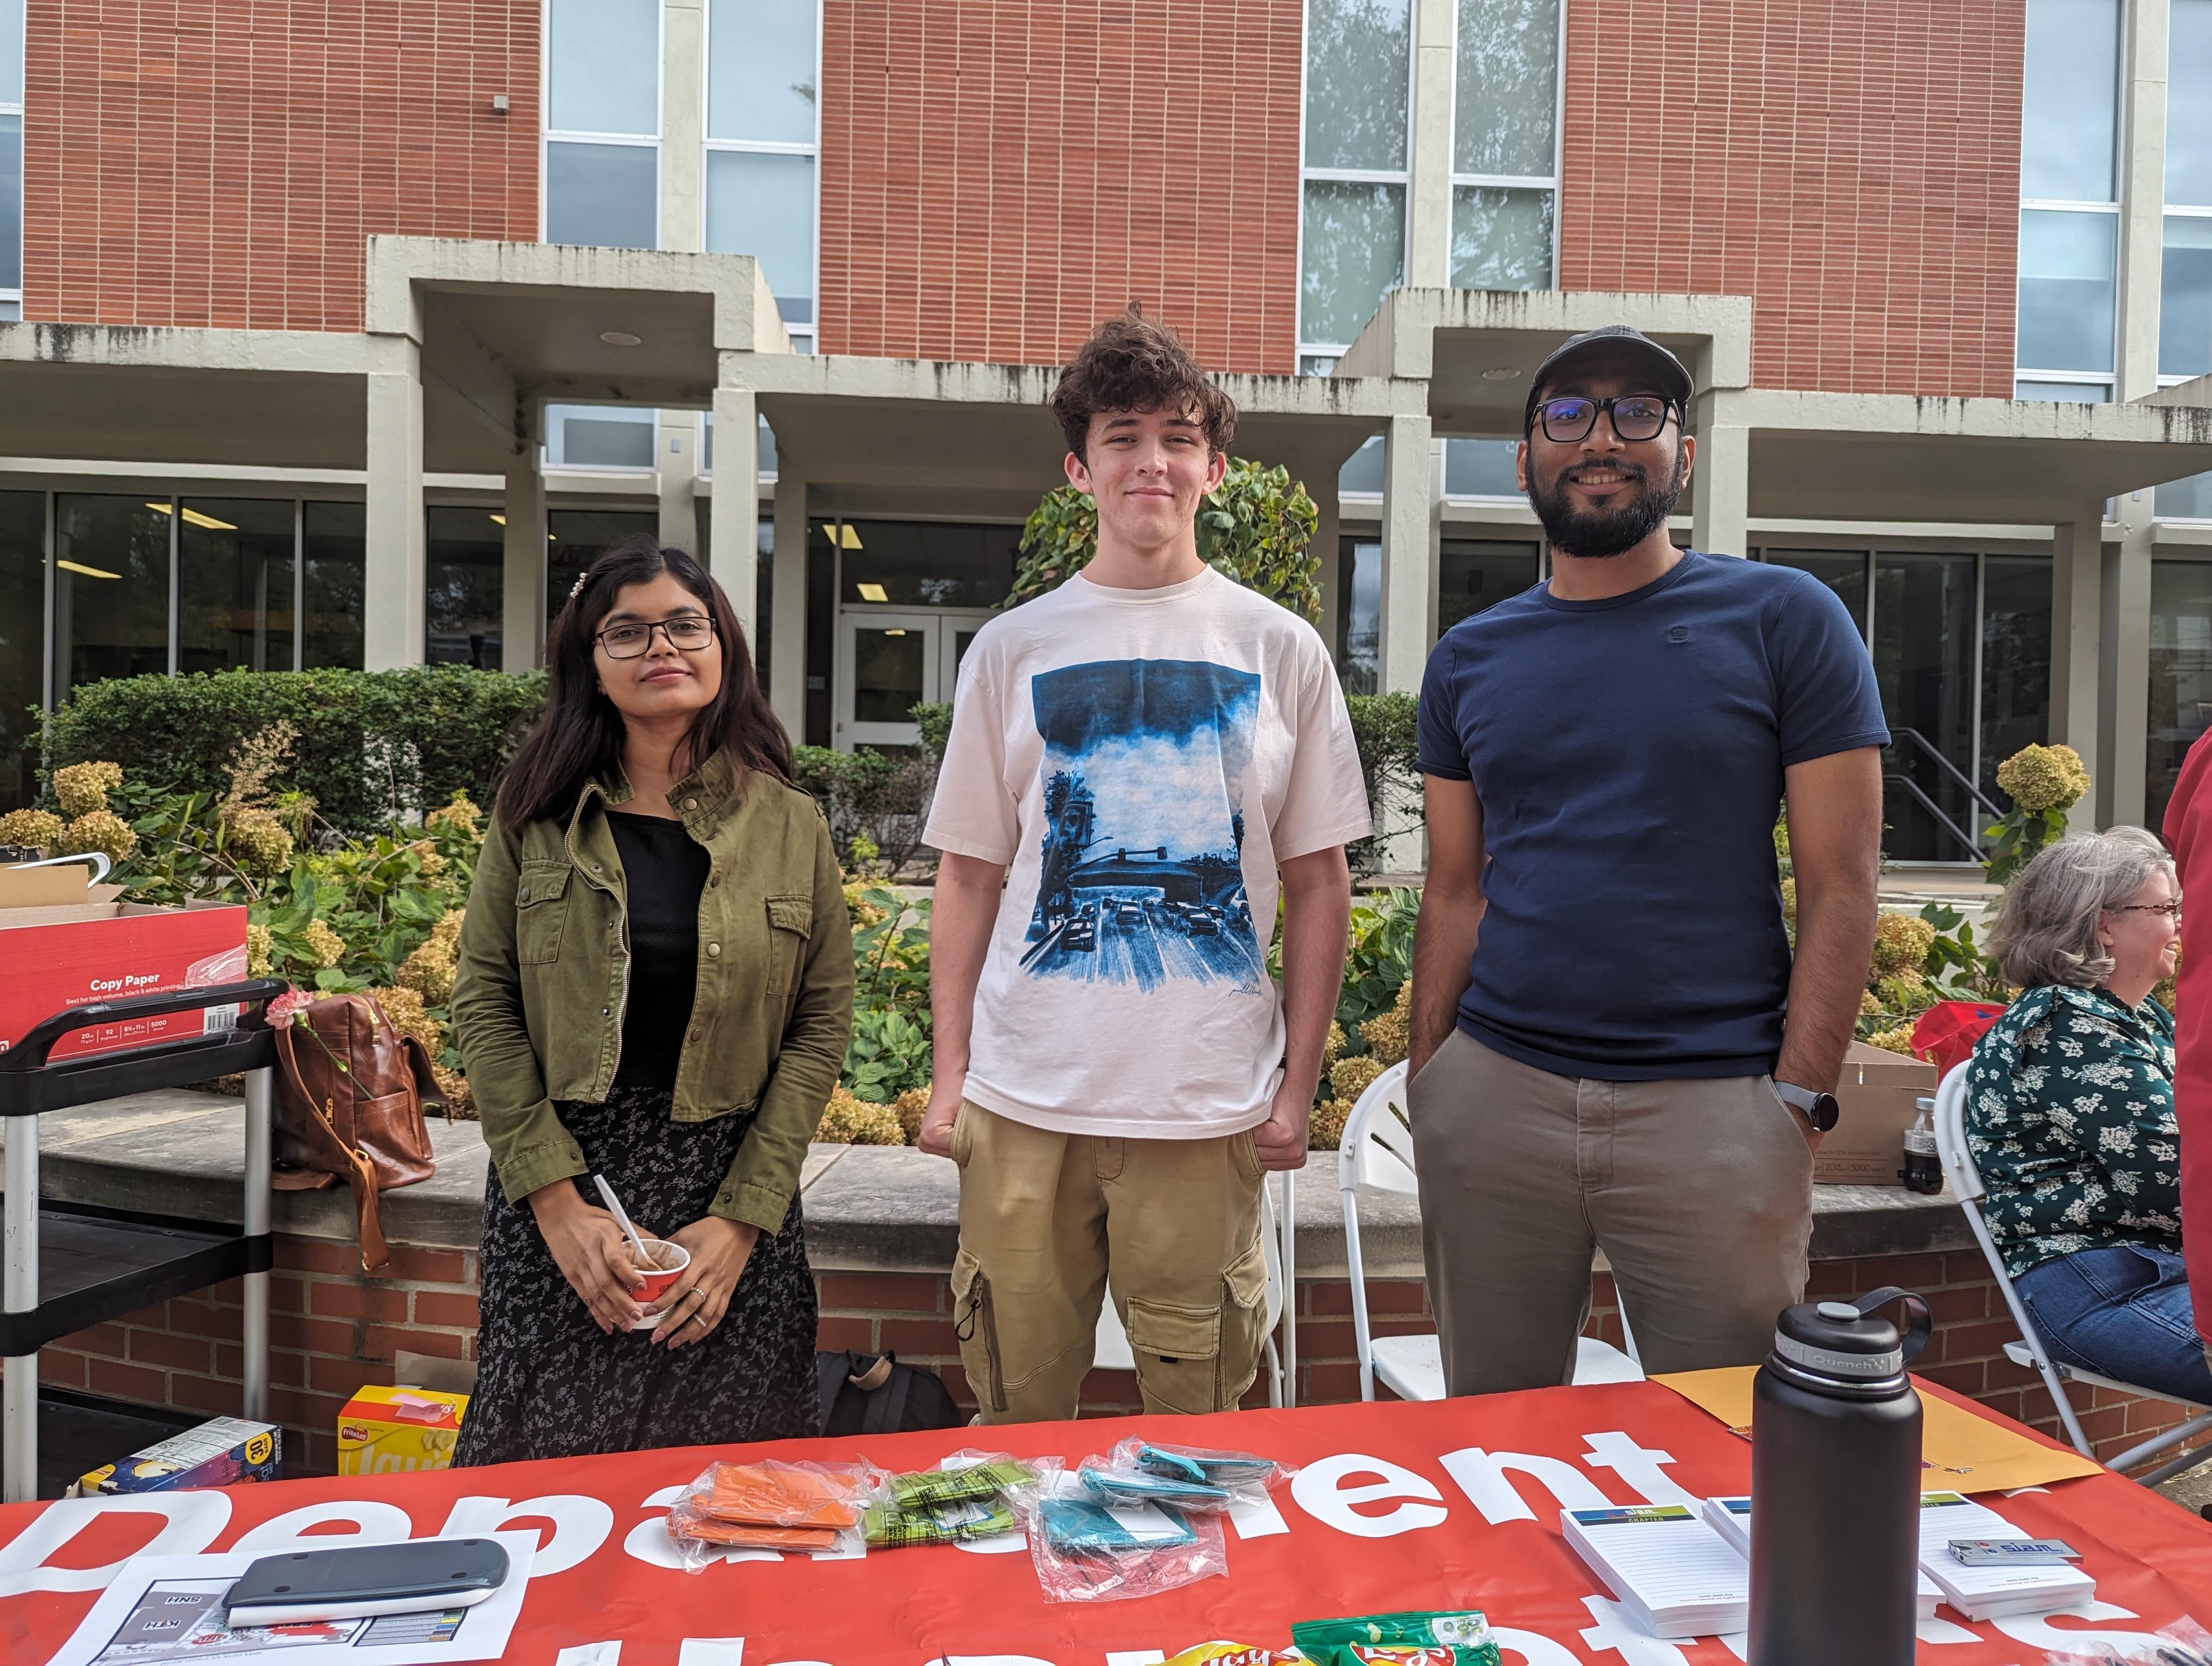 Three members of the WKU SIAM student chapter standing behind a table.